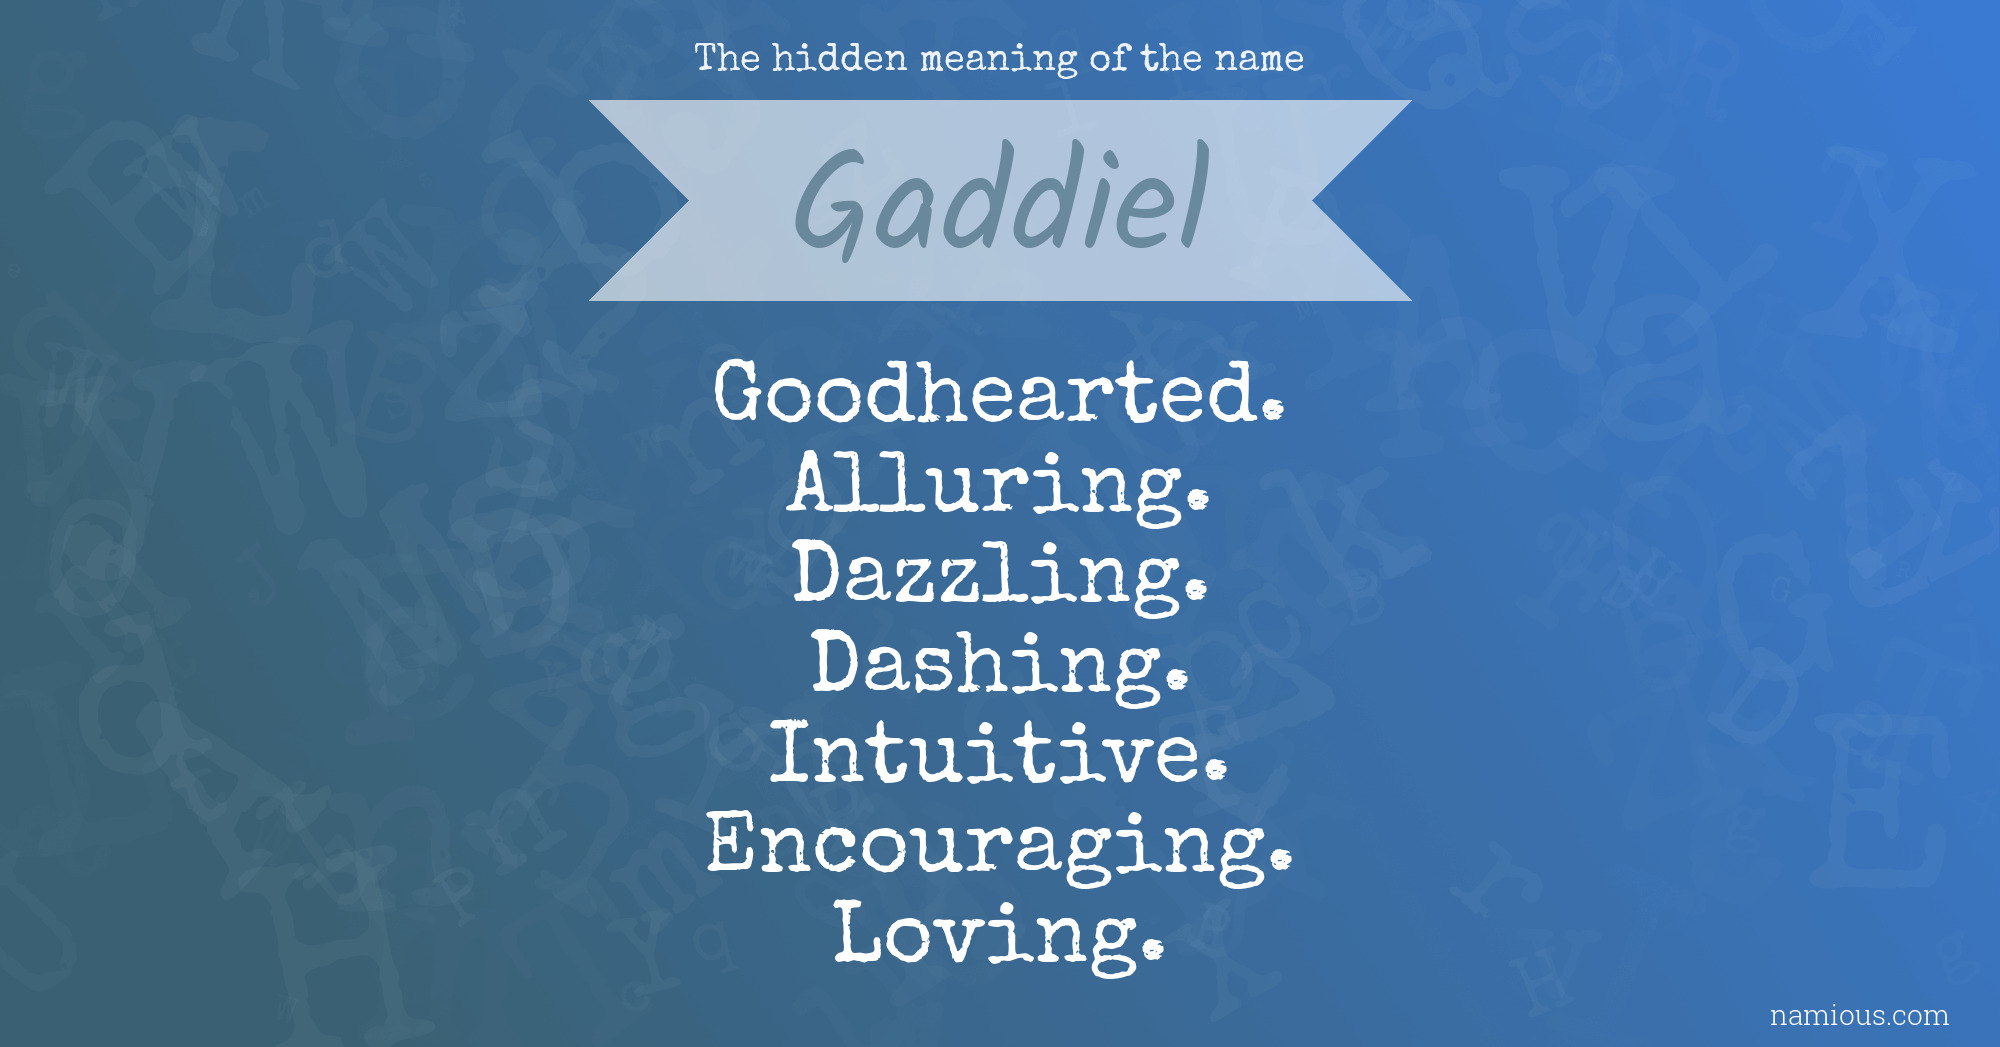 The hidden meaning of the name Gaddiel